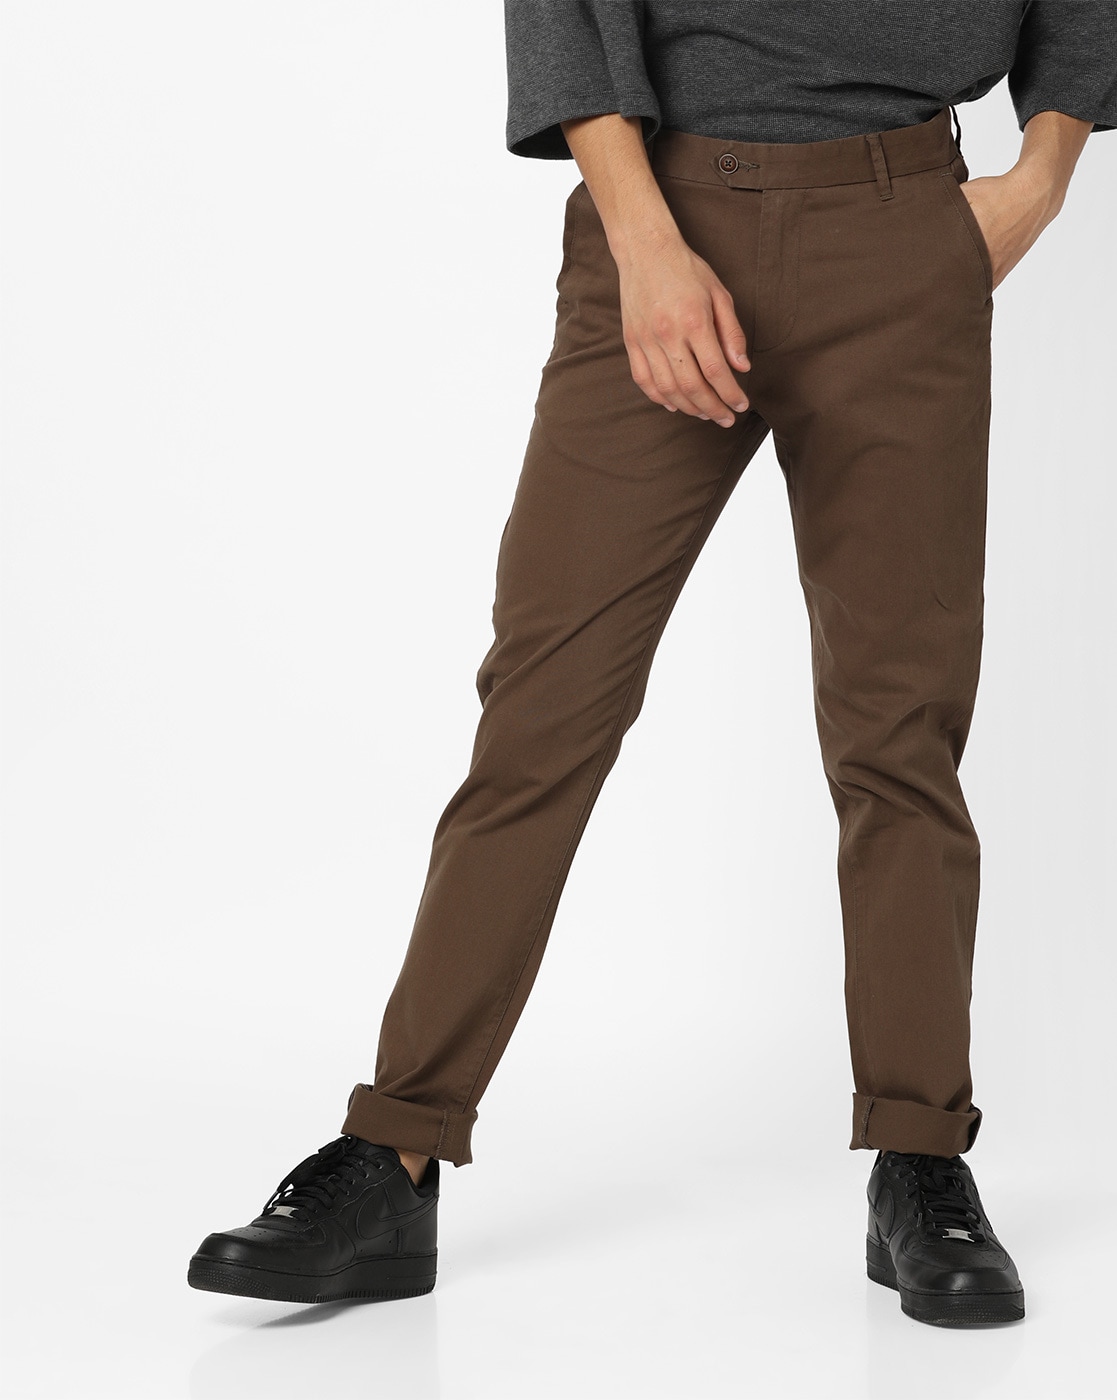 It's Time to Buy Brown Pants